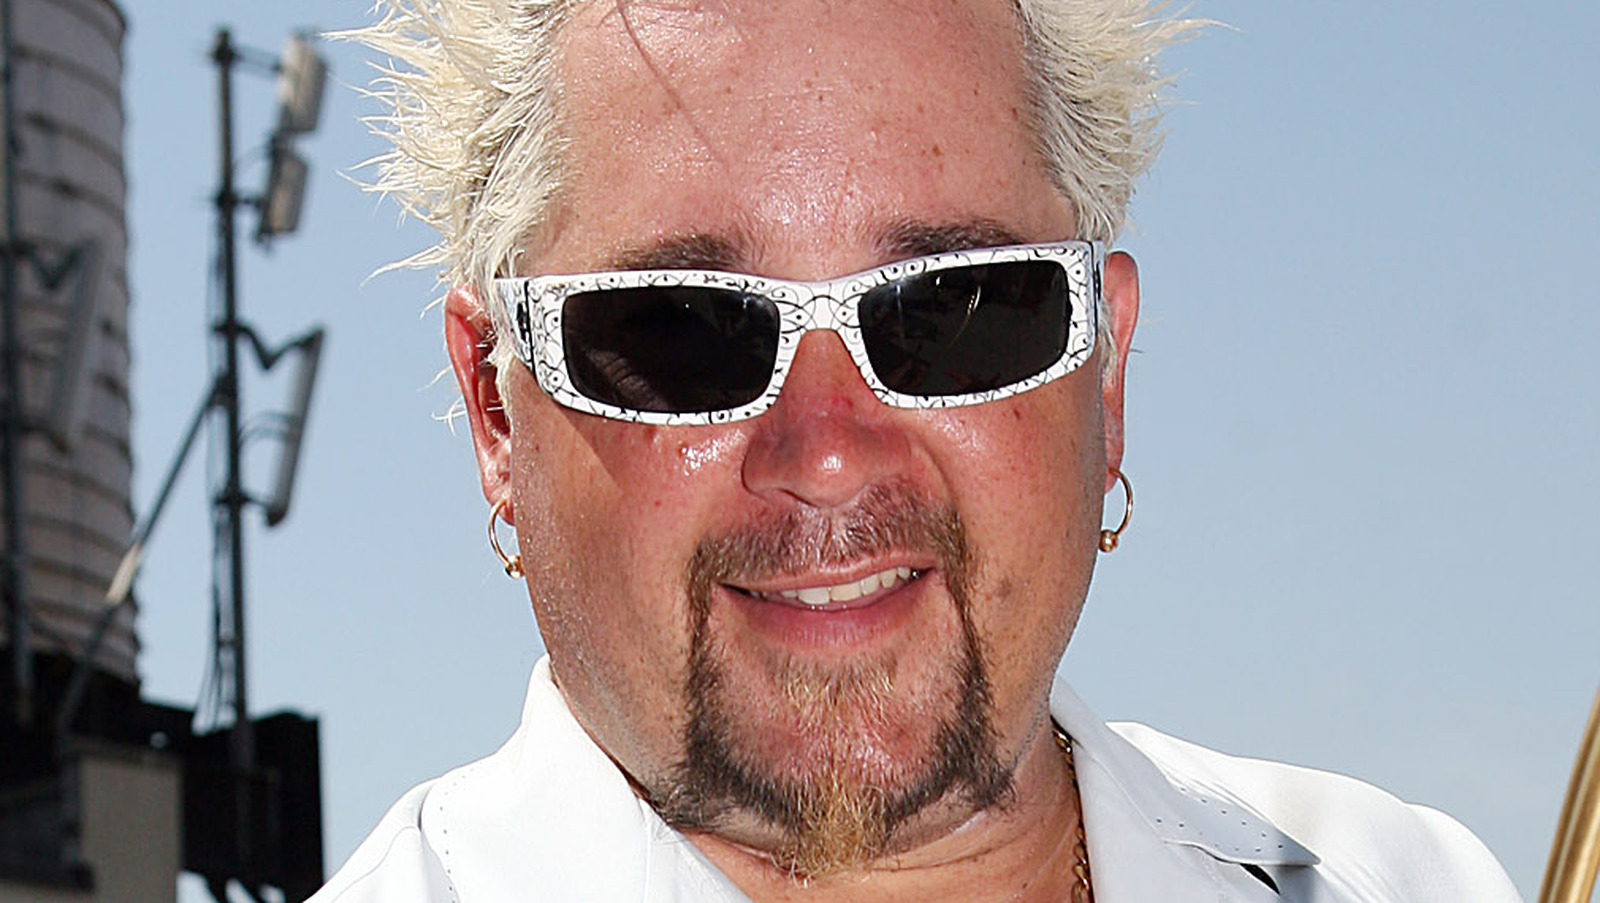 https://www.thelist.com/img/gallery/the-stunning-transformation-of-guy-fieri/l-intro-1623684293.jpg